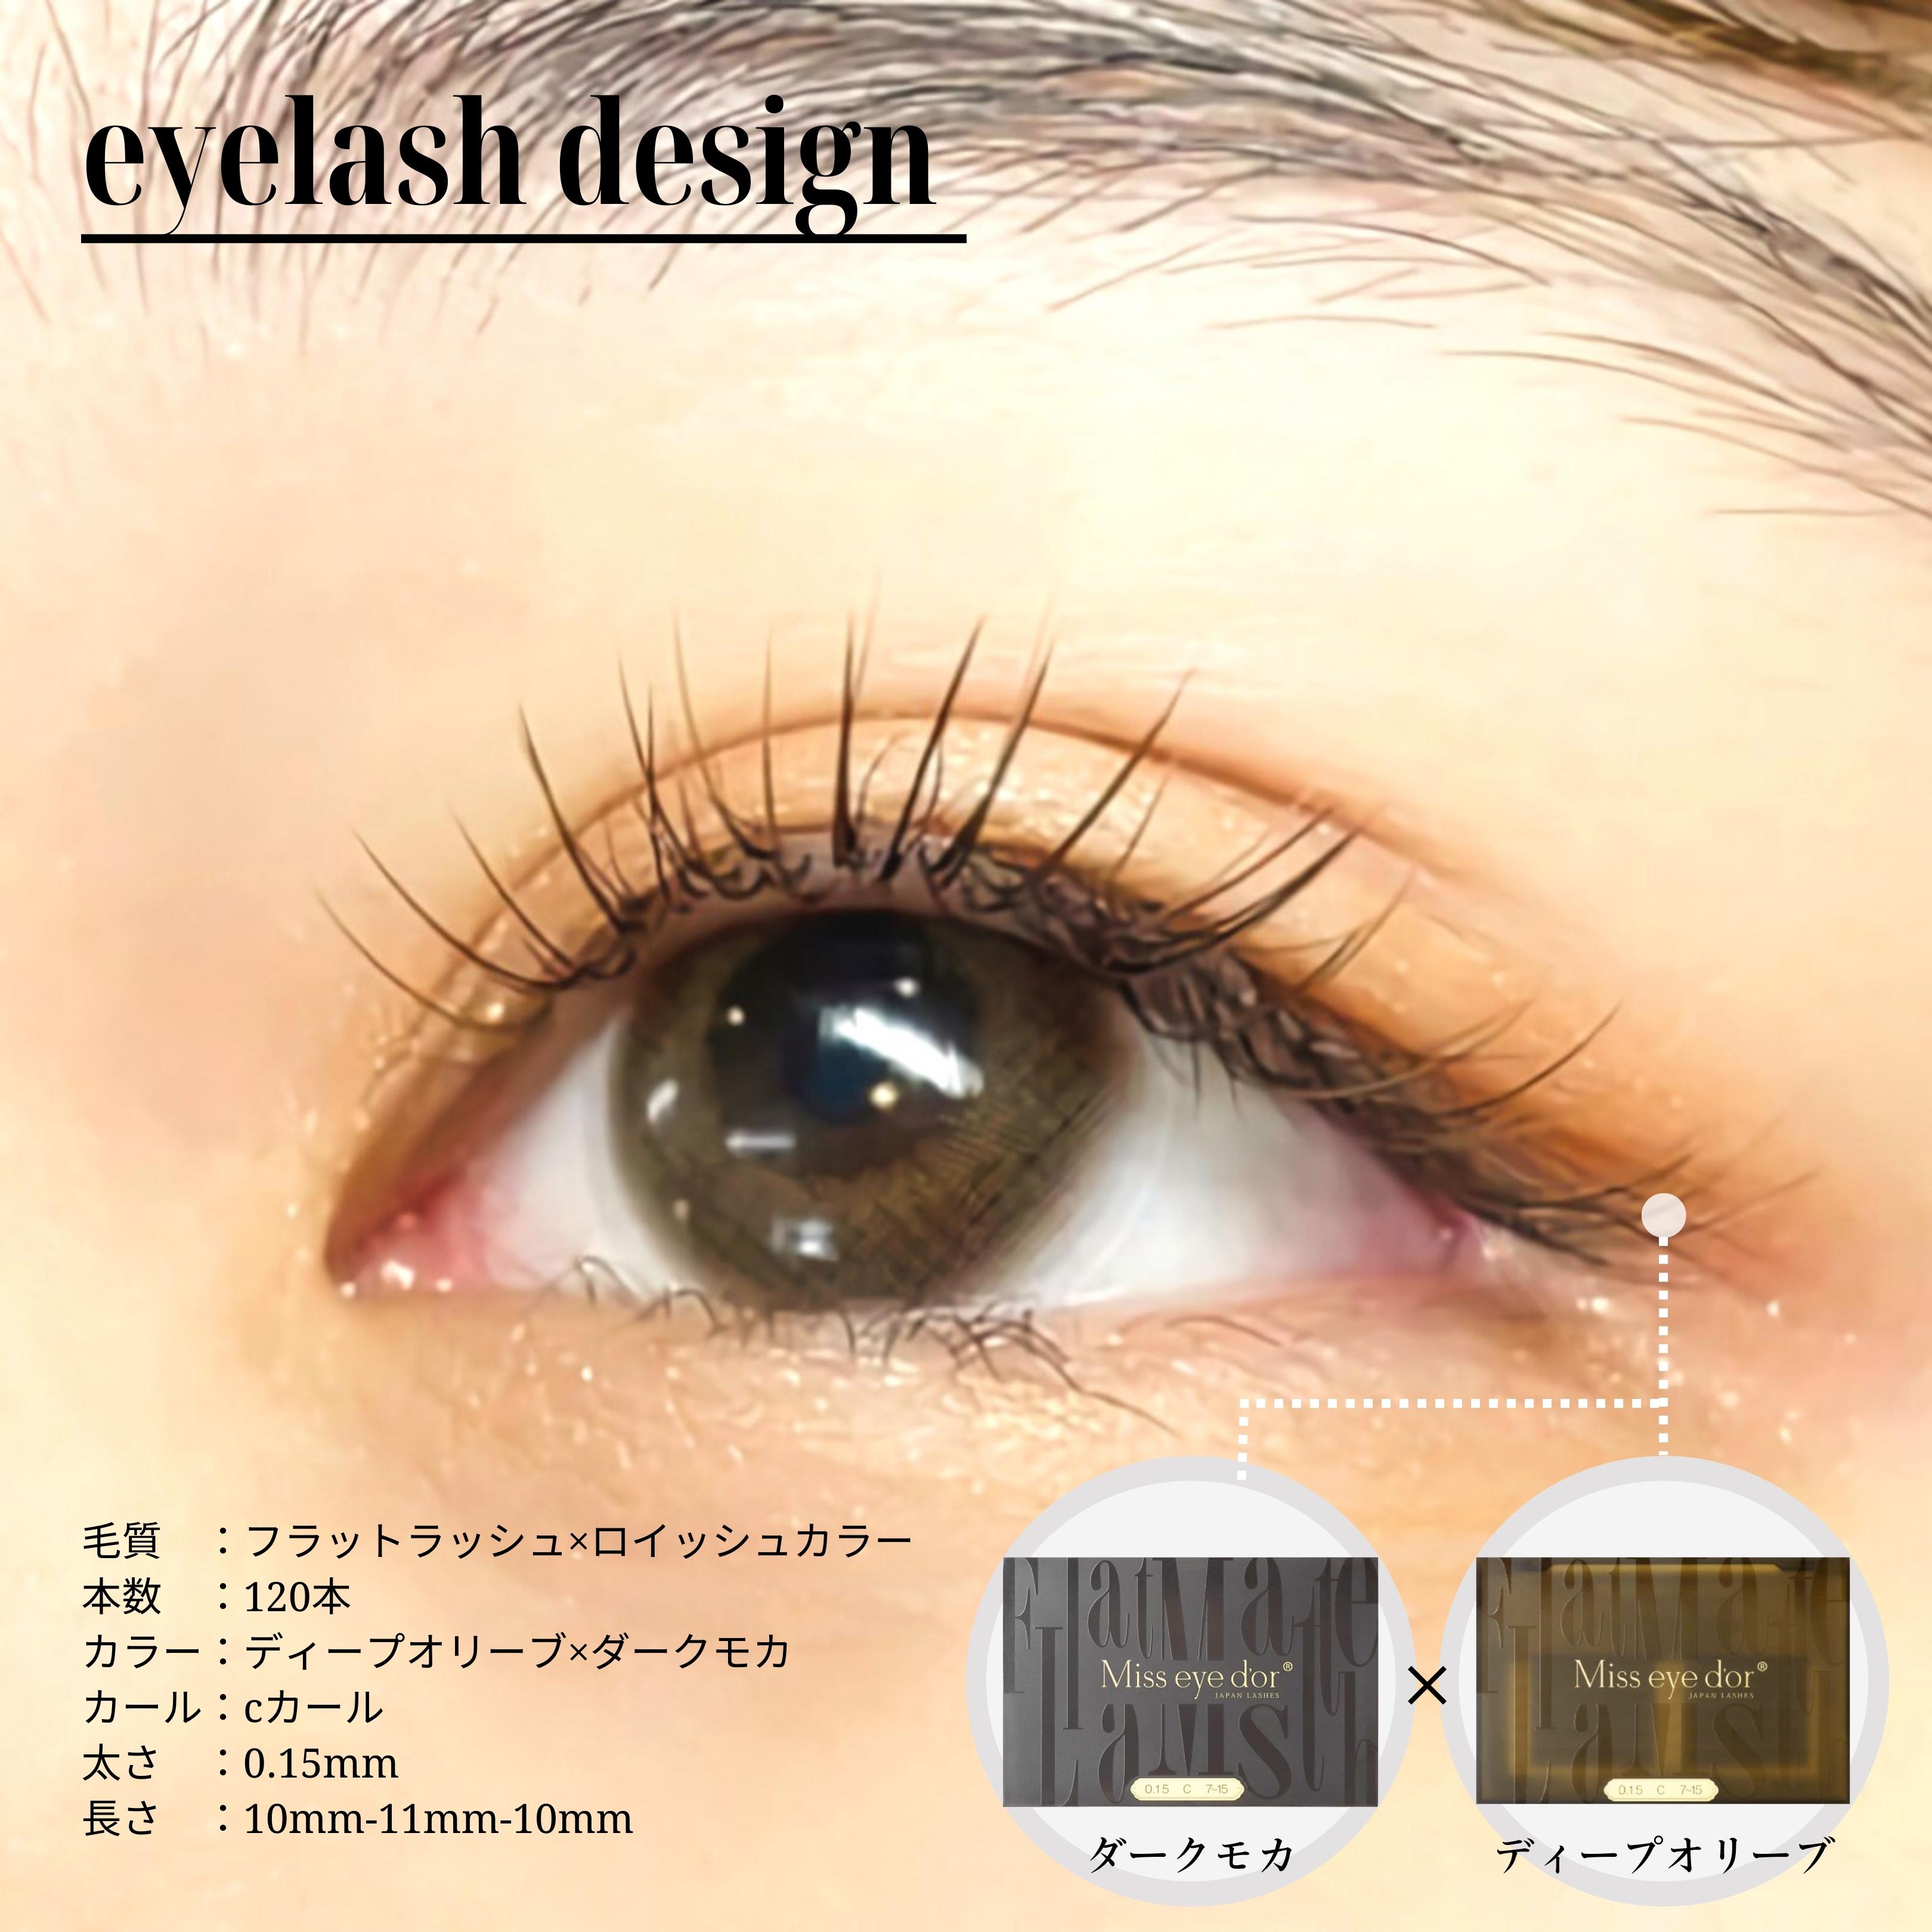 miss eye d'or 0.15mm CCカール 8mm - 通販 - sge.com.br